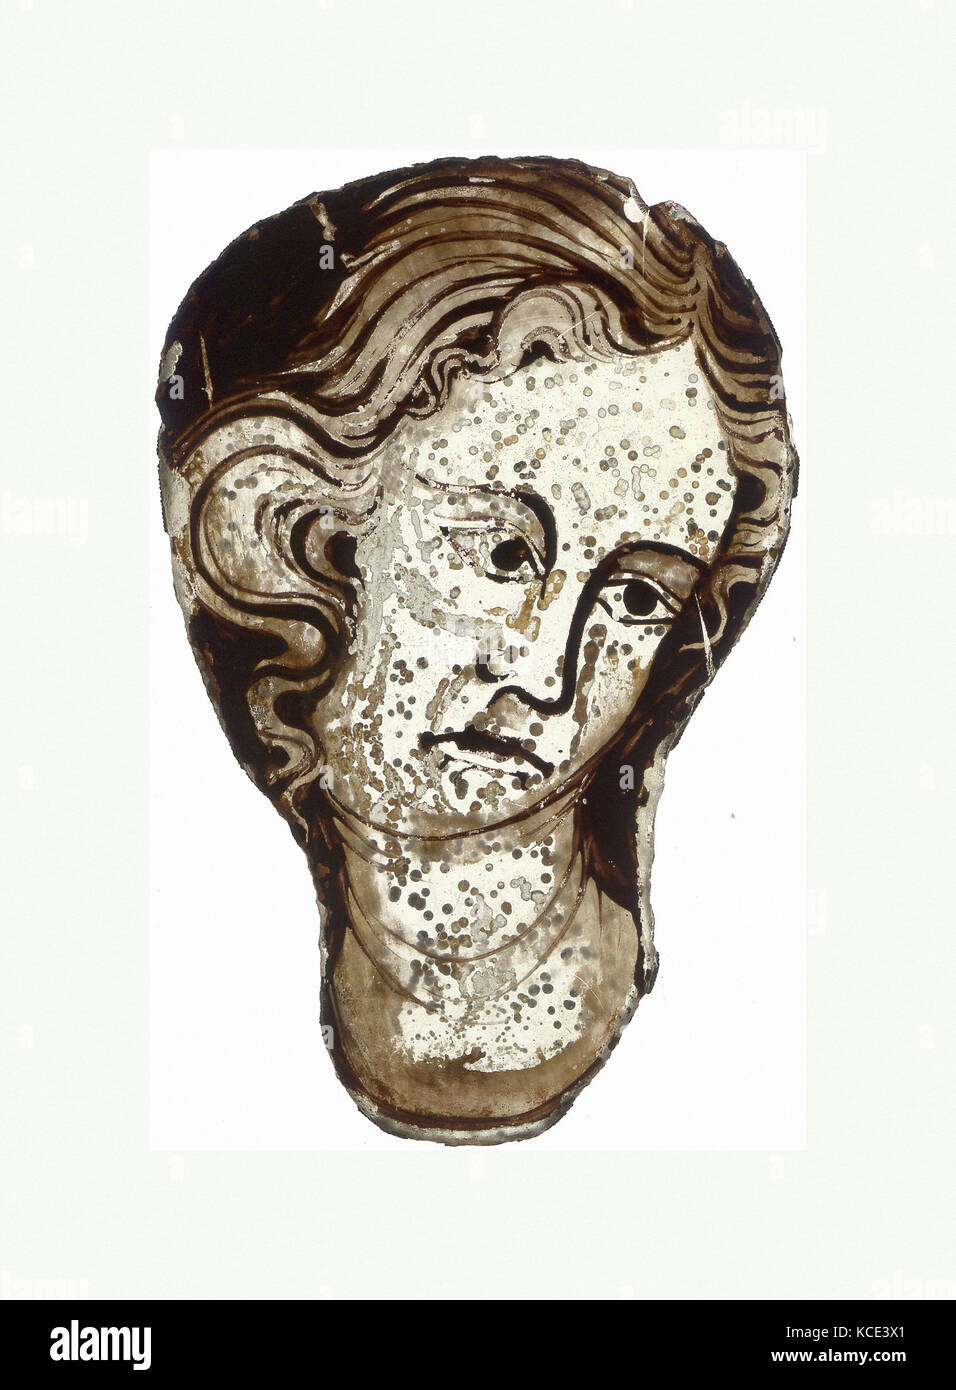 Head of a Young Woman, early 14th century, North French, Colorless glass and vitreous paint, Overall: 5 3/16 x 3 5/16 x 1/8 in Stock Photo